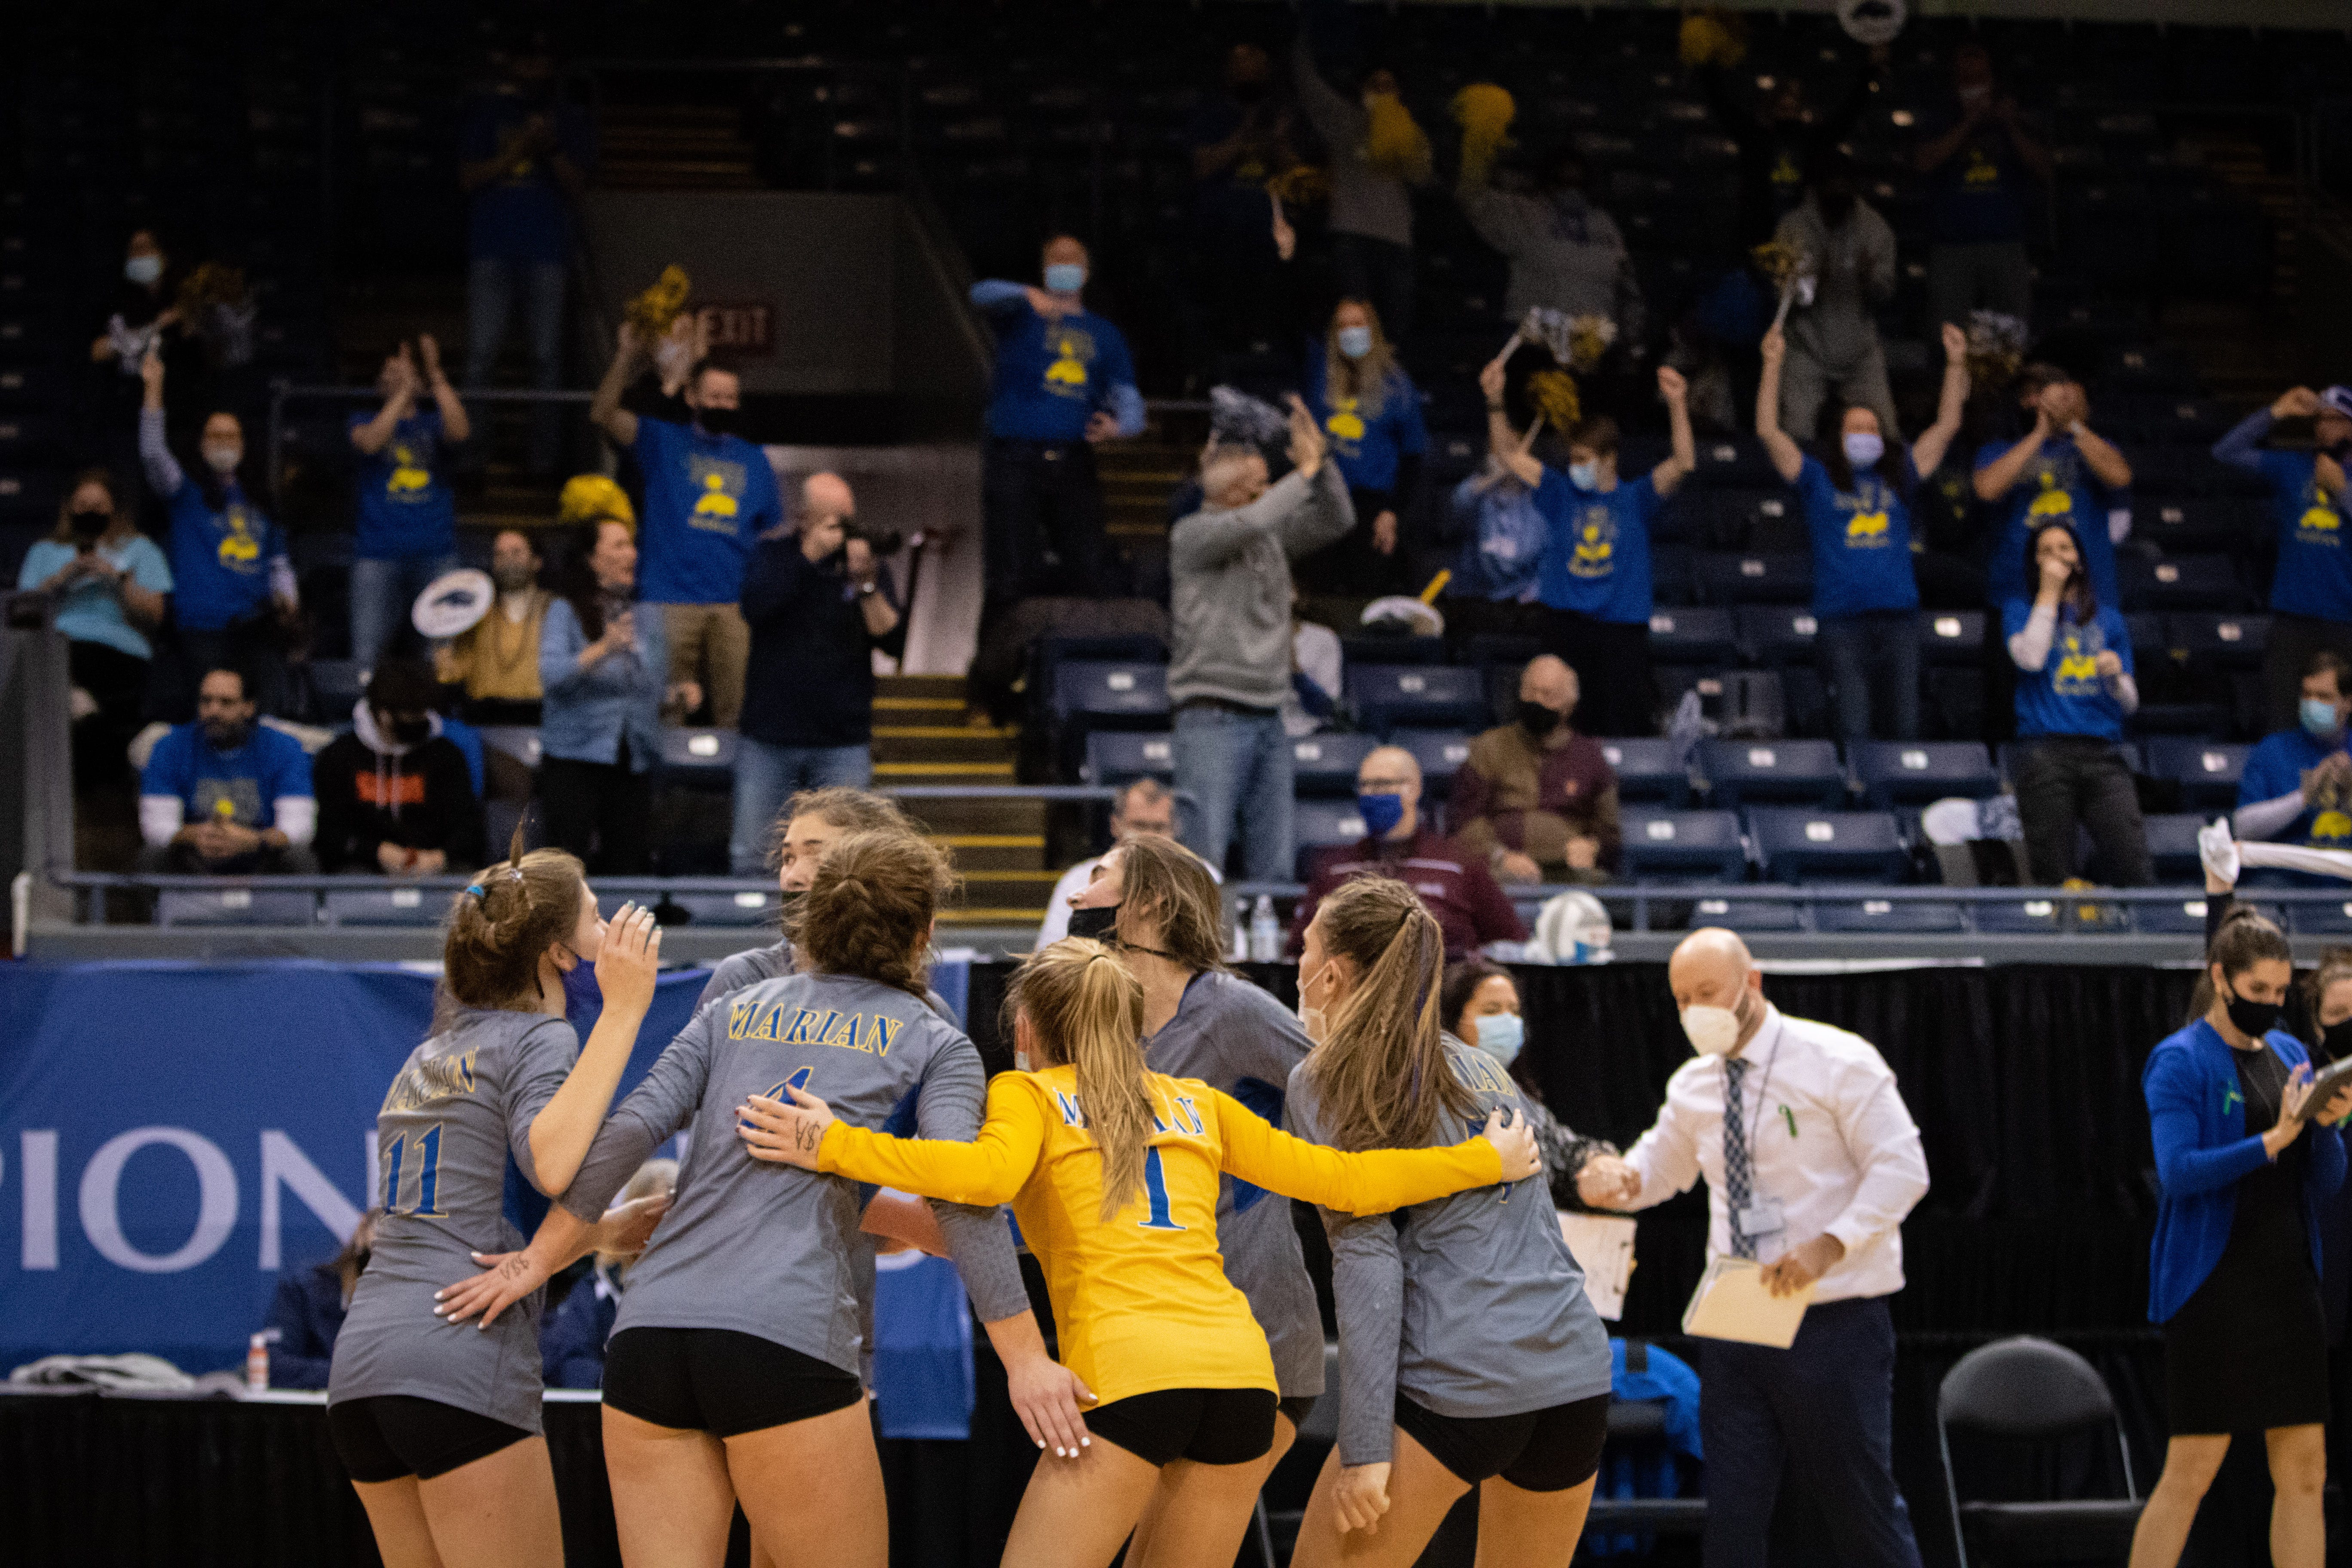 Marian players celebrate a point won while fans cheer as Bloomfield Hills Marian defeats Lowell for the Division 1 volleyball final.